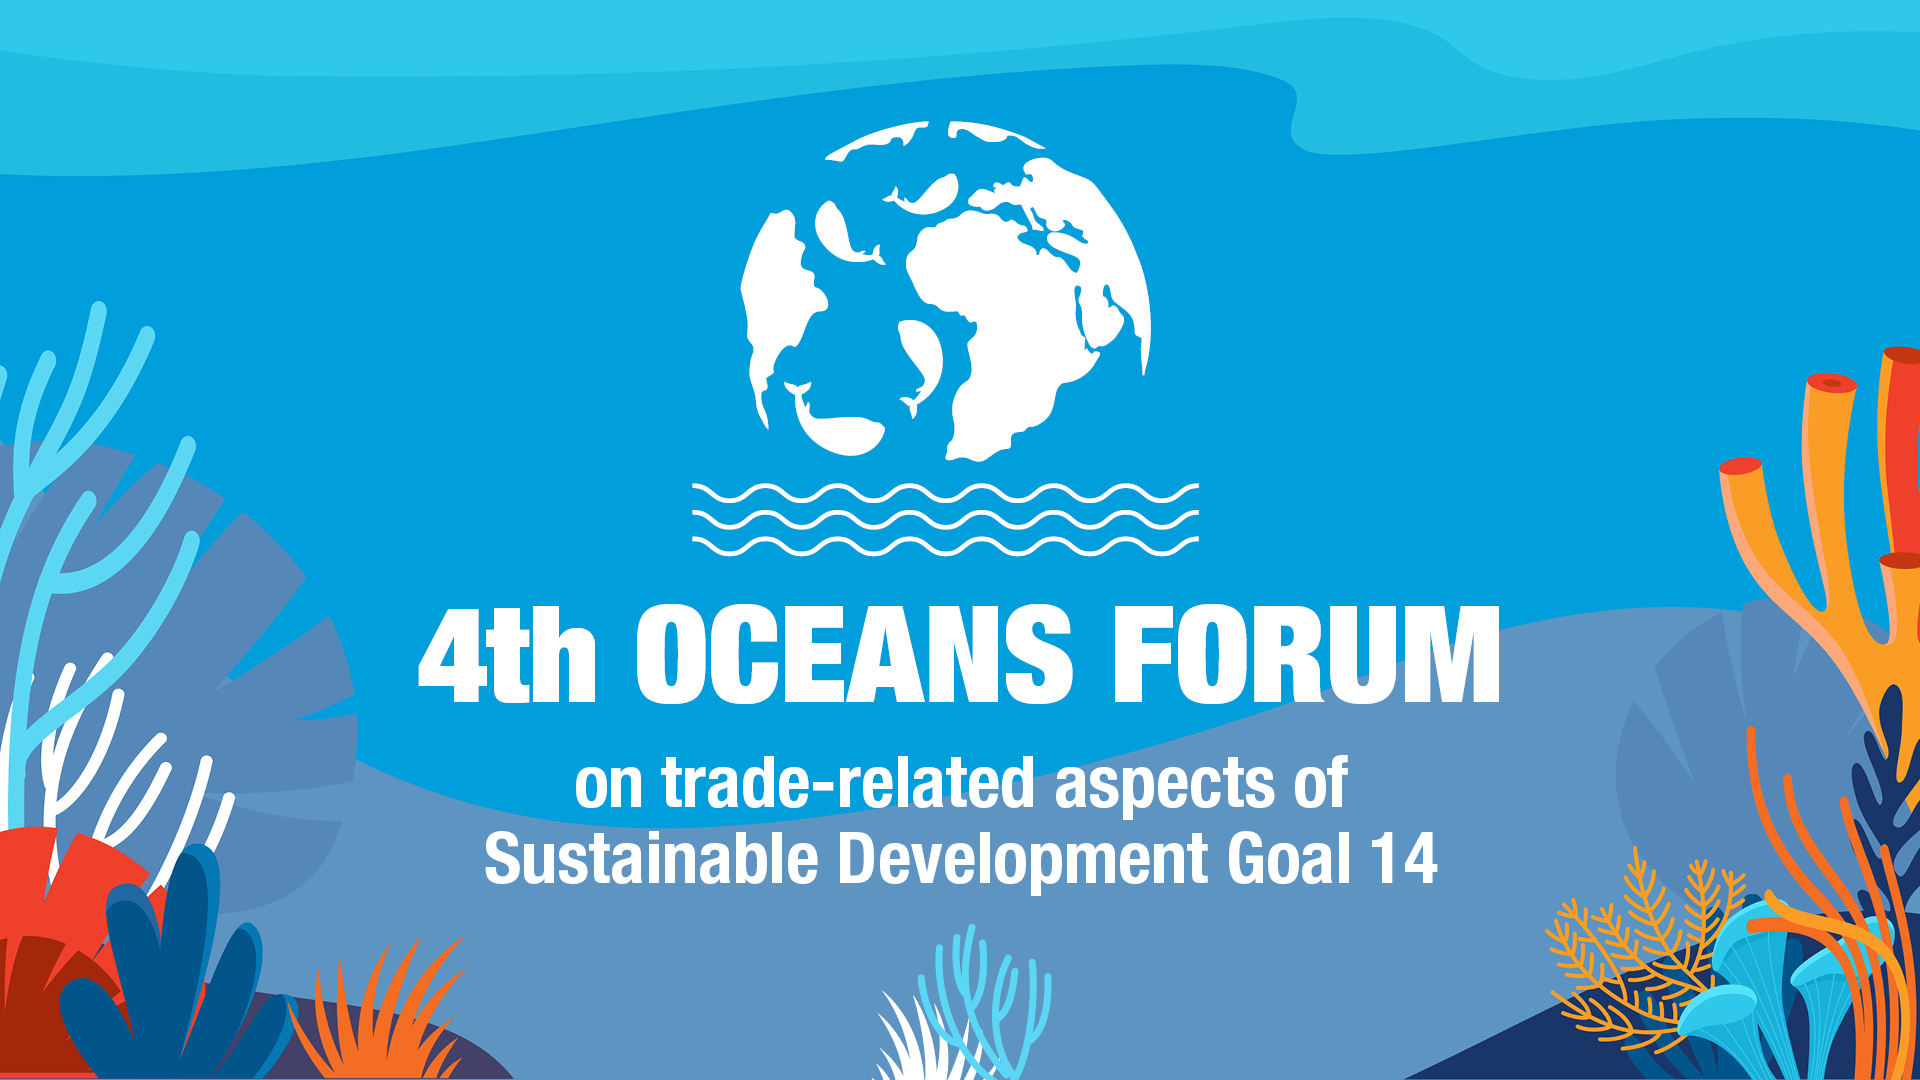 4th Oceans Forum on trade-related aspects of Sustainable Development Goal 14